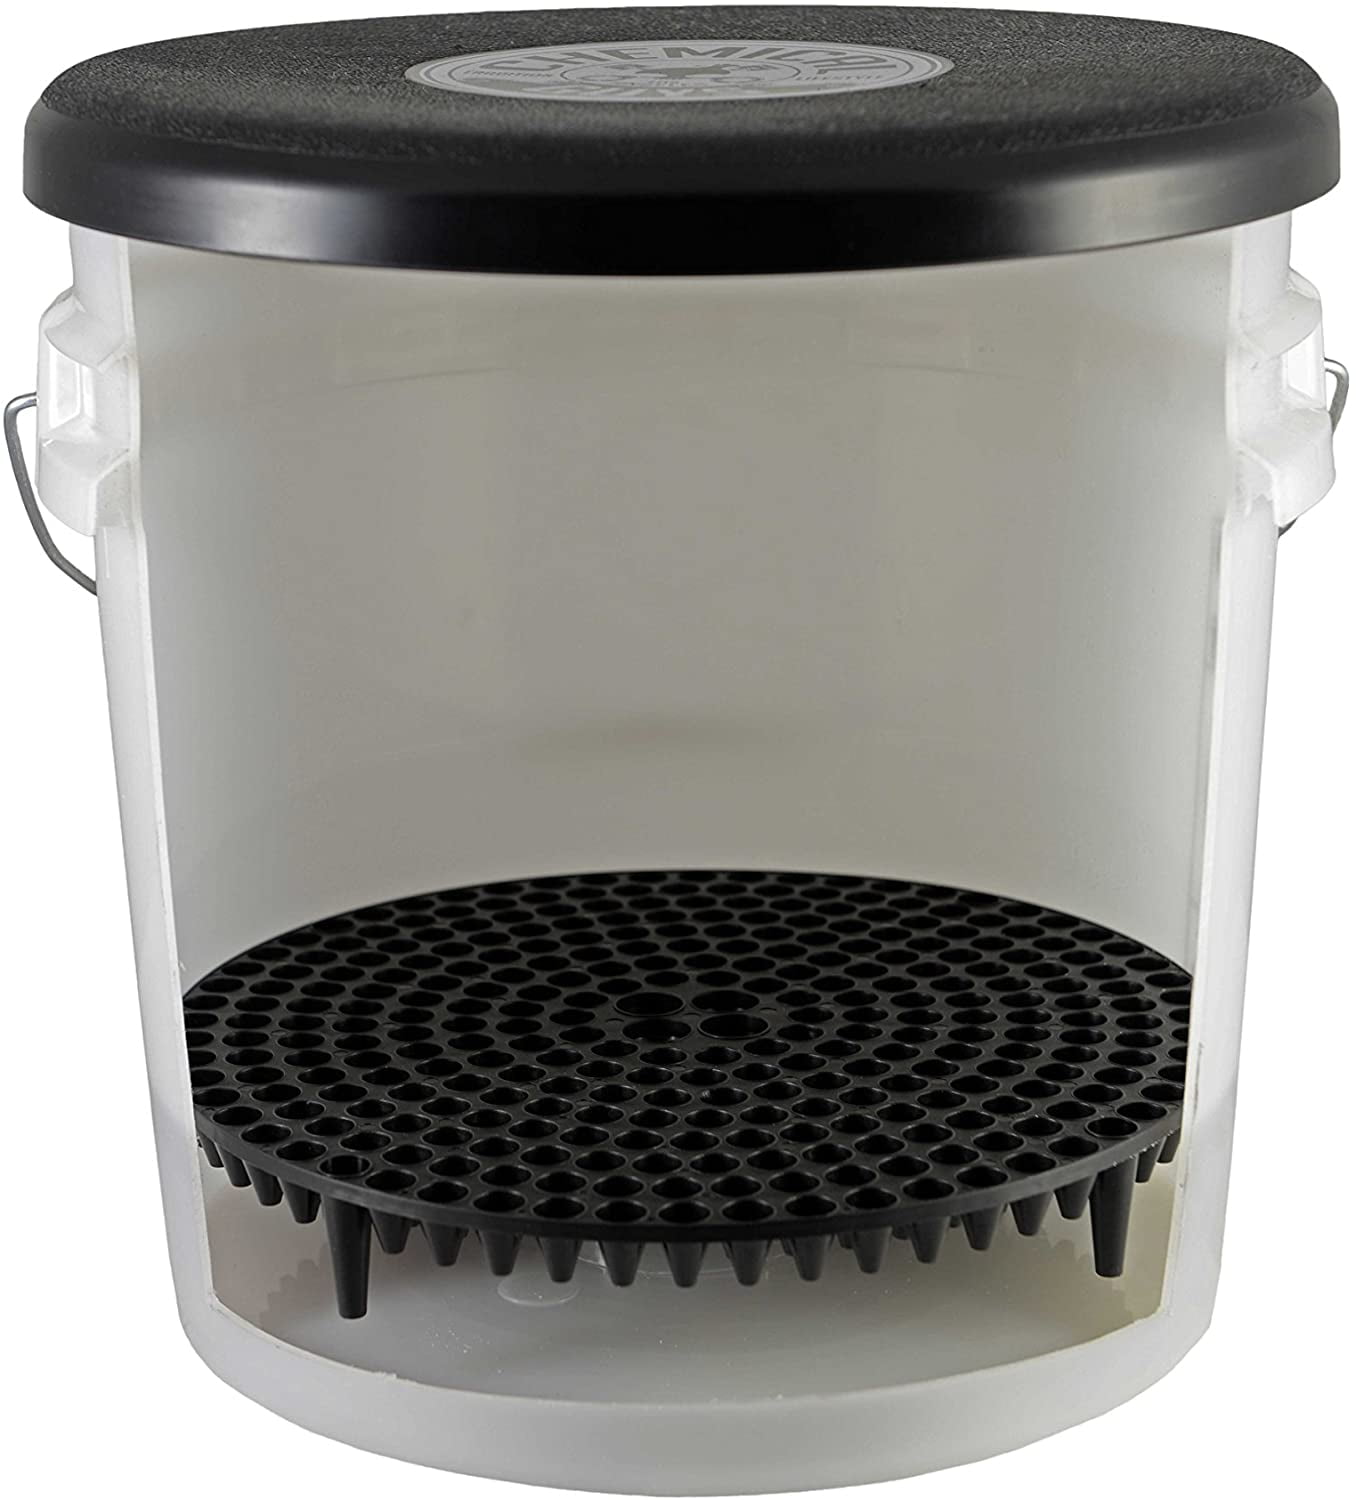 Car Wash Bucket Insert Filter Removes Dirt and Debris While You Wash Cyclone Red 